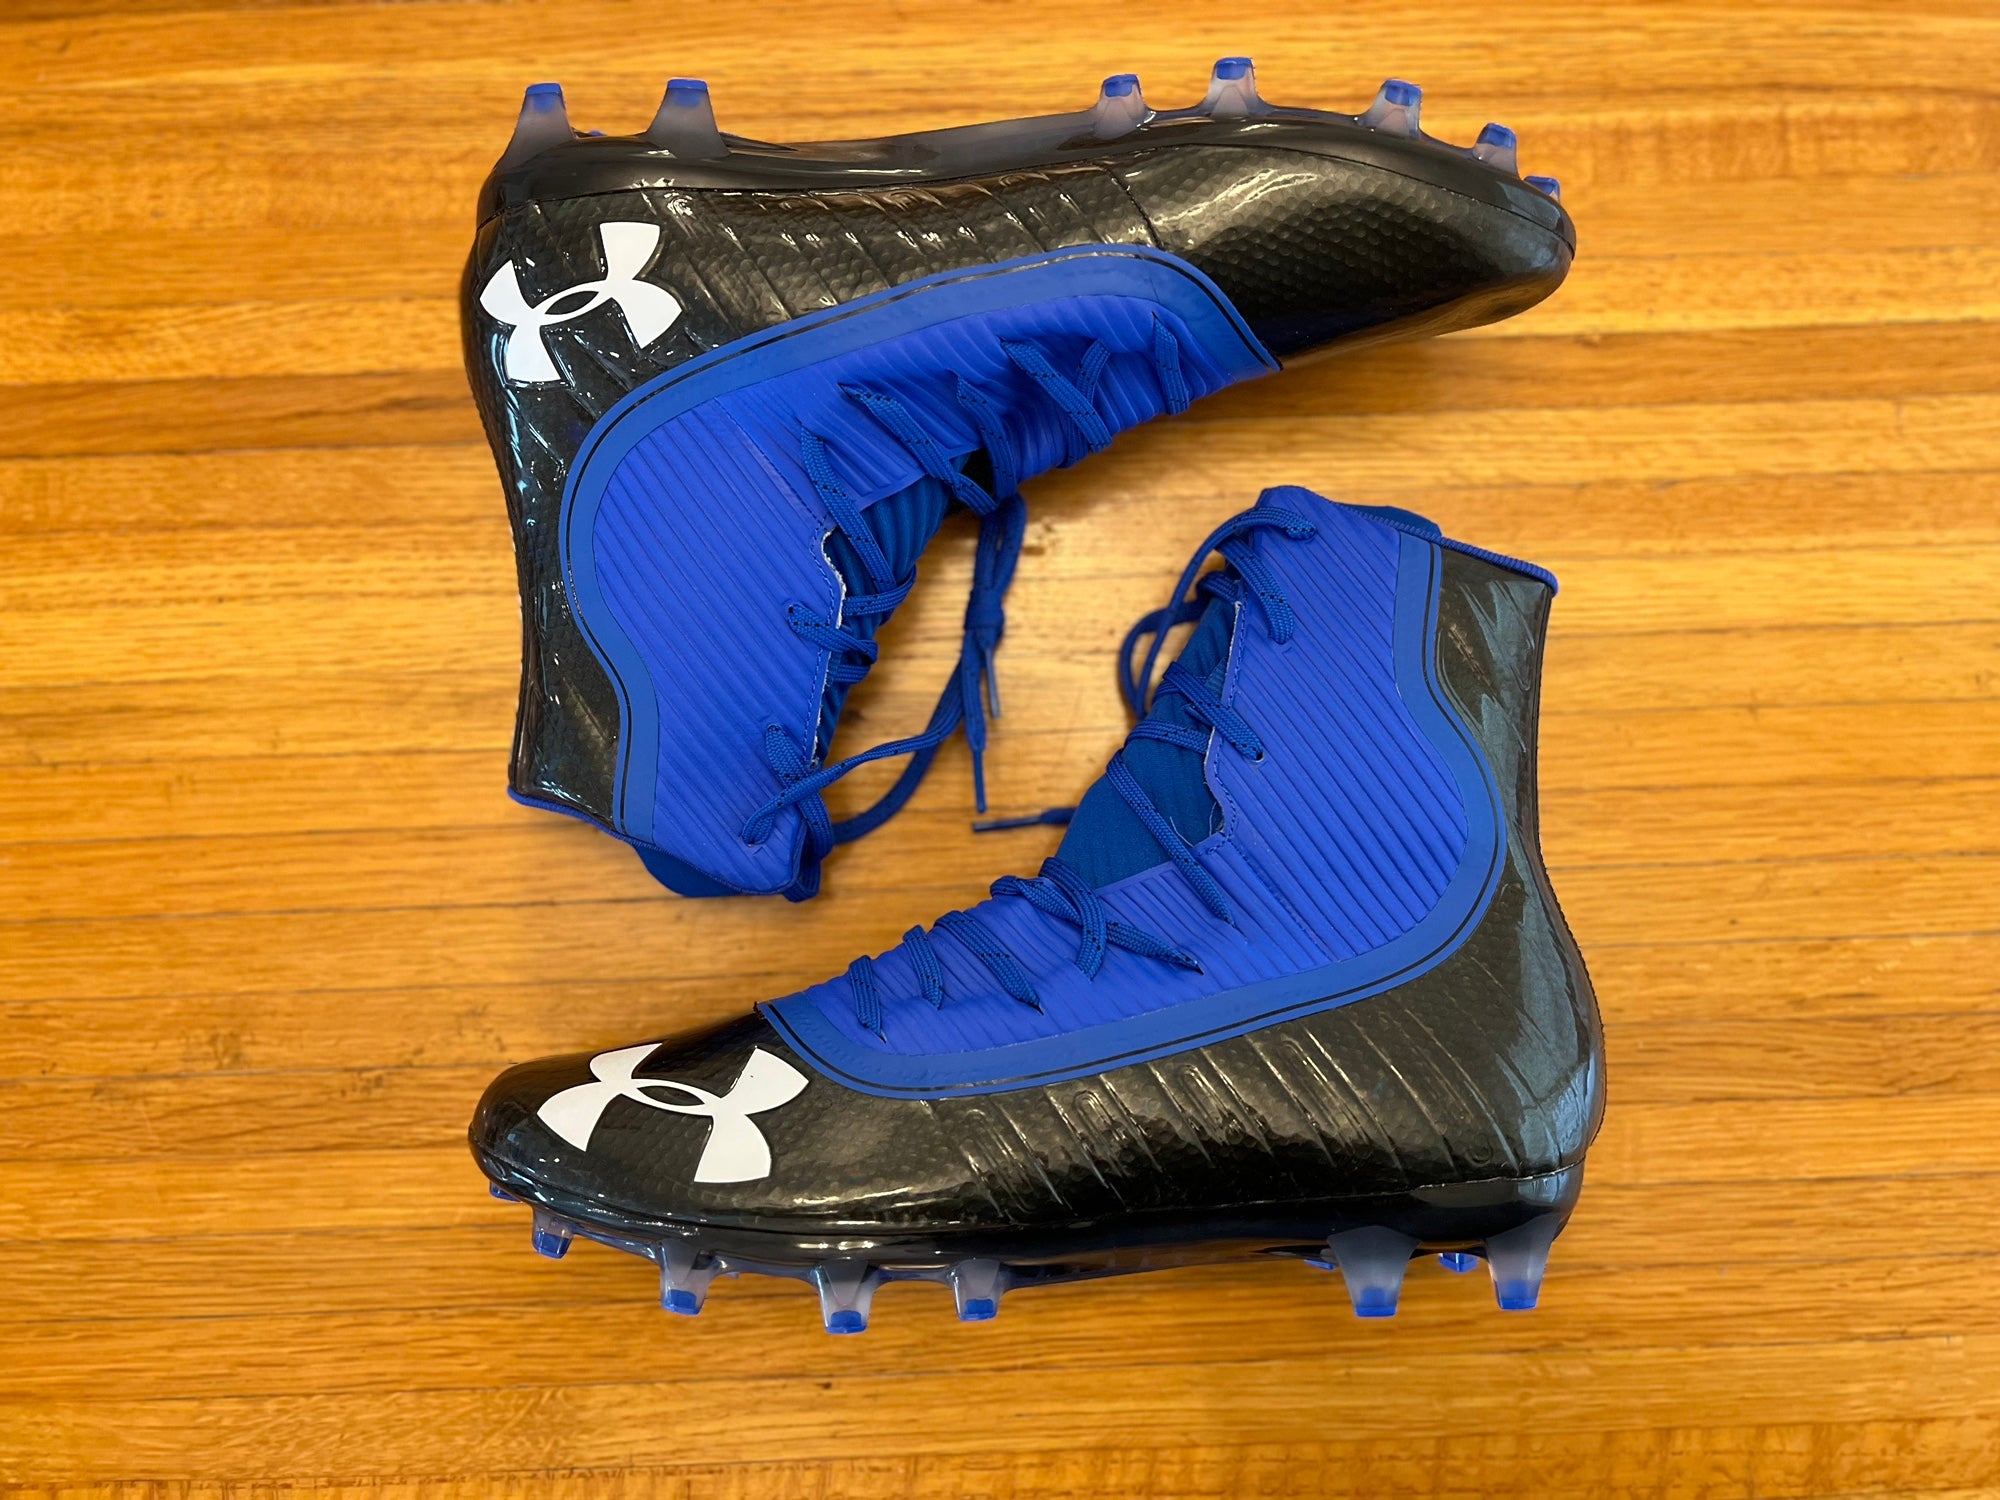 Louis Vuitton Football cleats ❕Colored with a deep crismon red